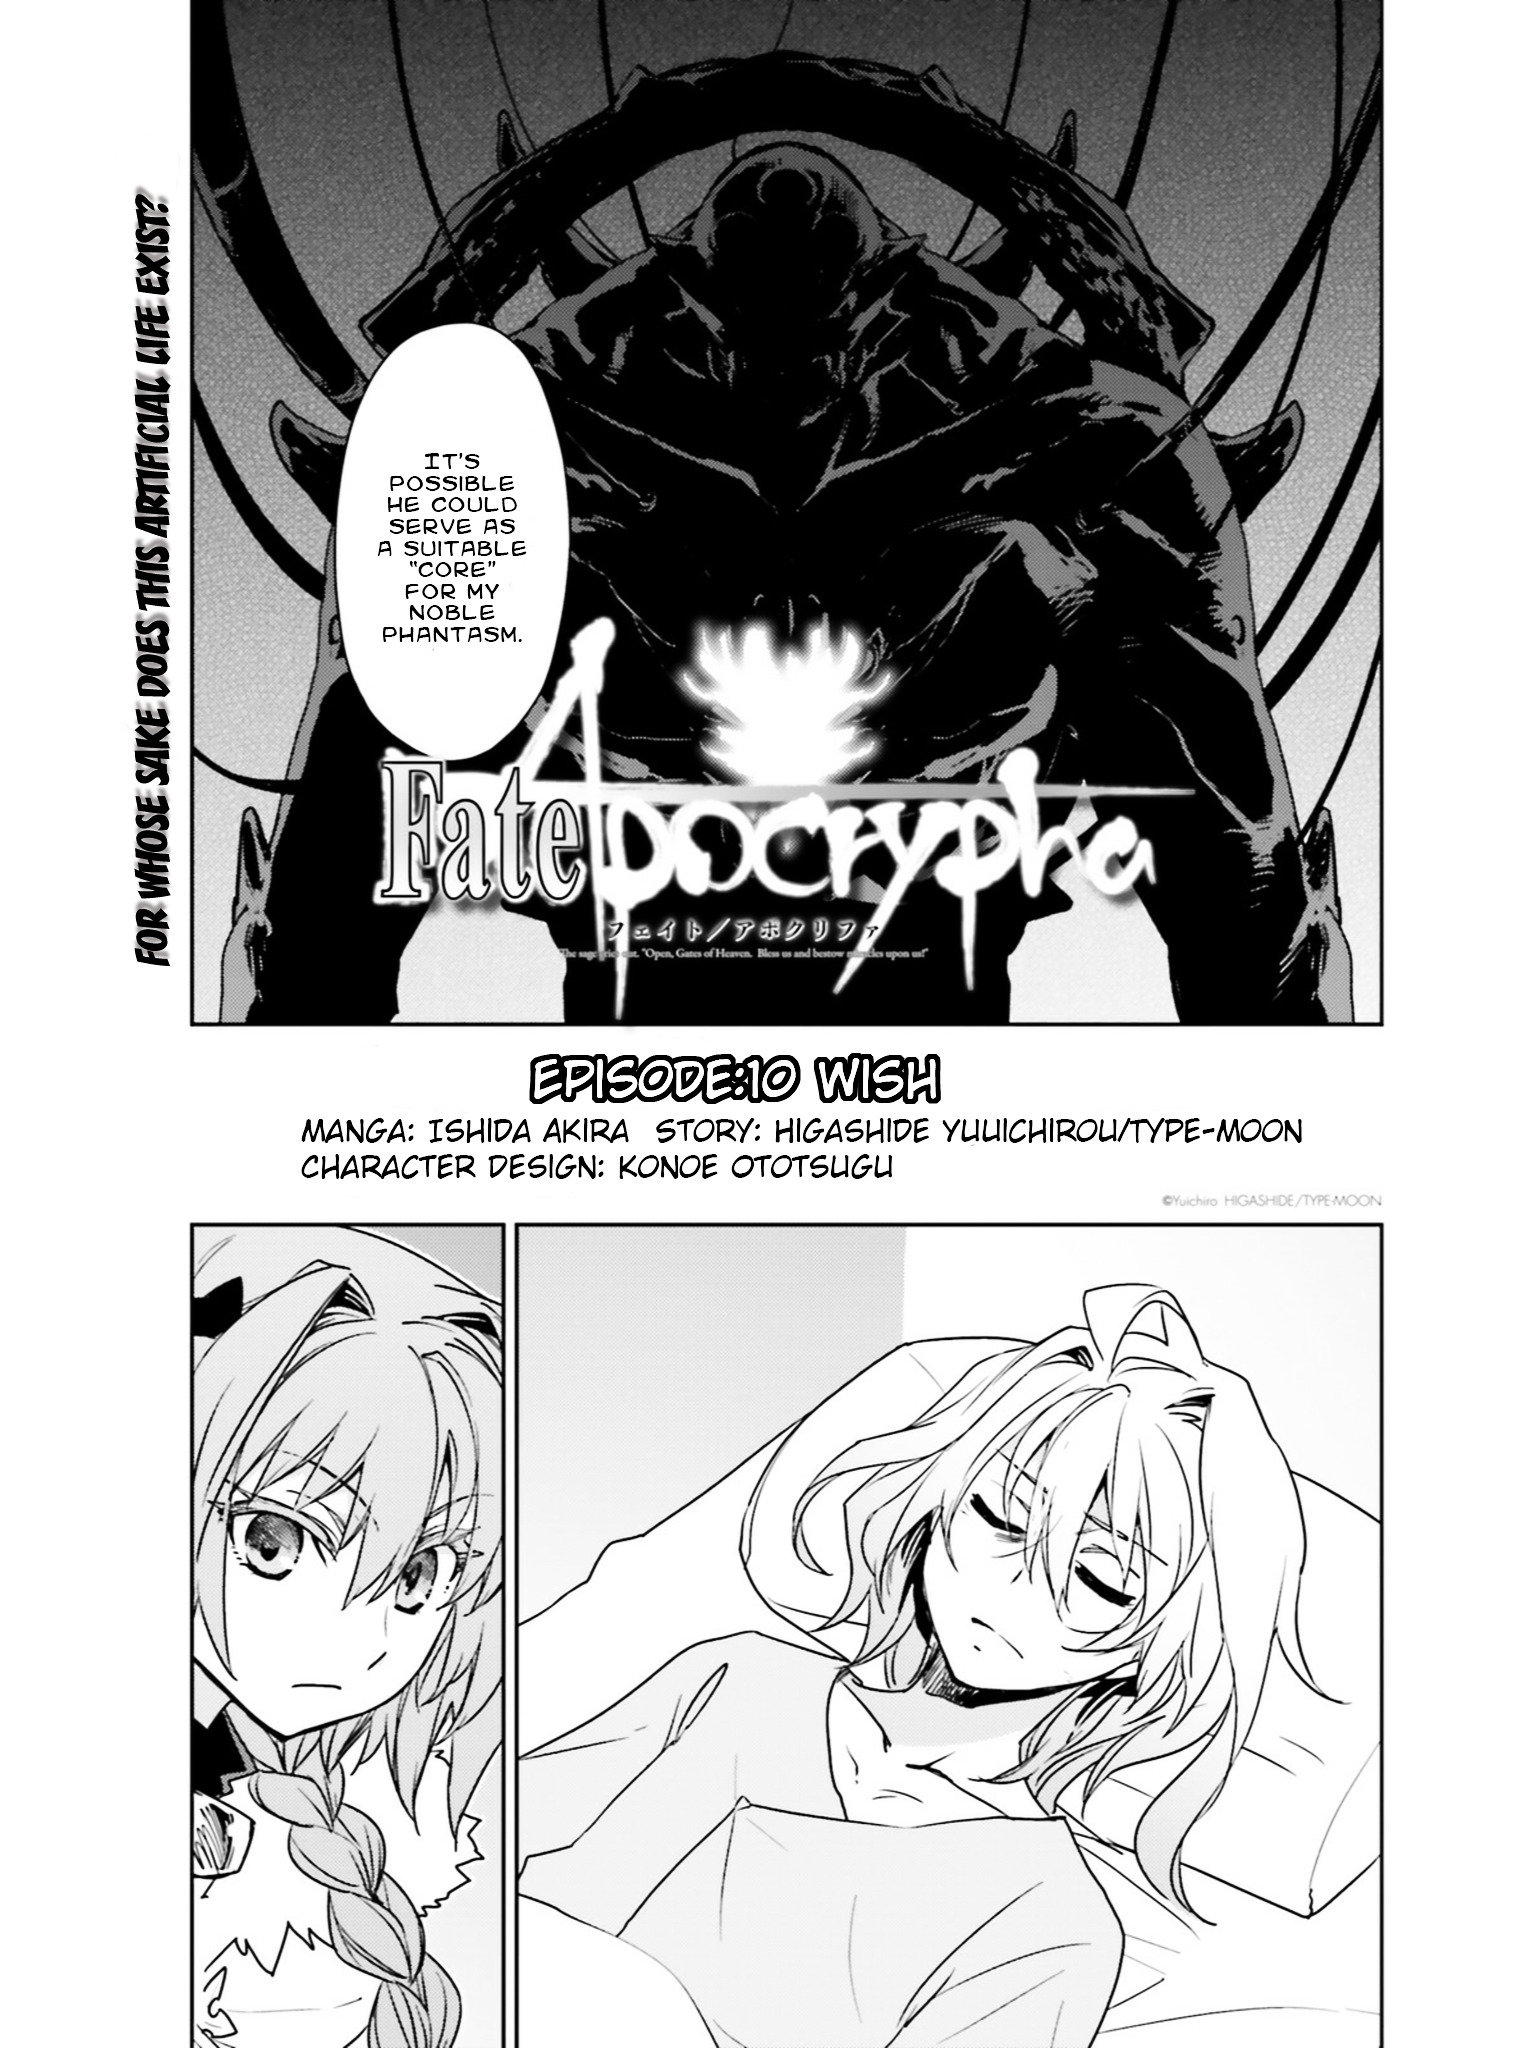 Fate/apocrypha Chapter 10 : Episode: 10 Wish - Picture 3